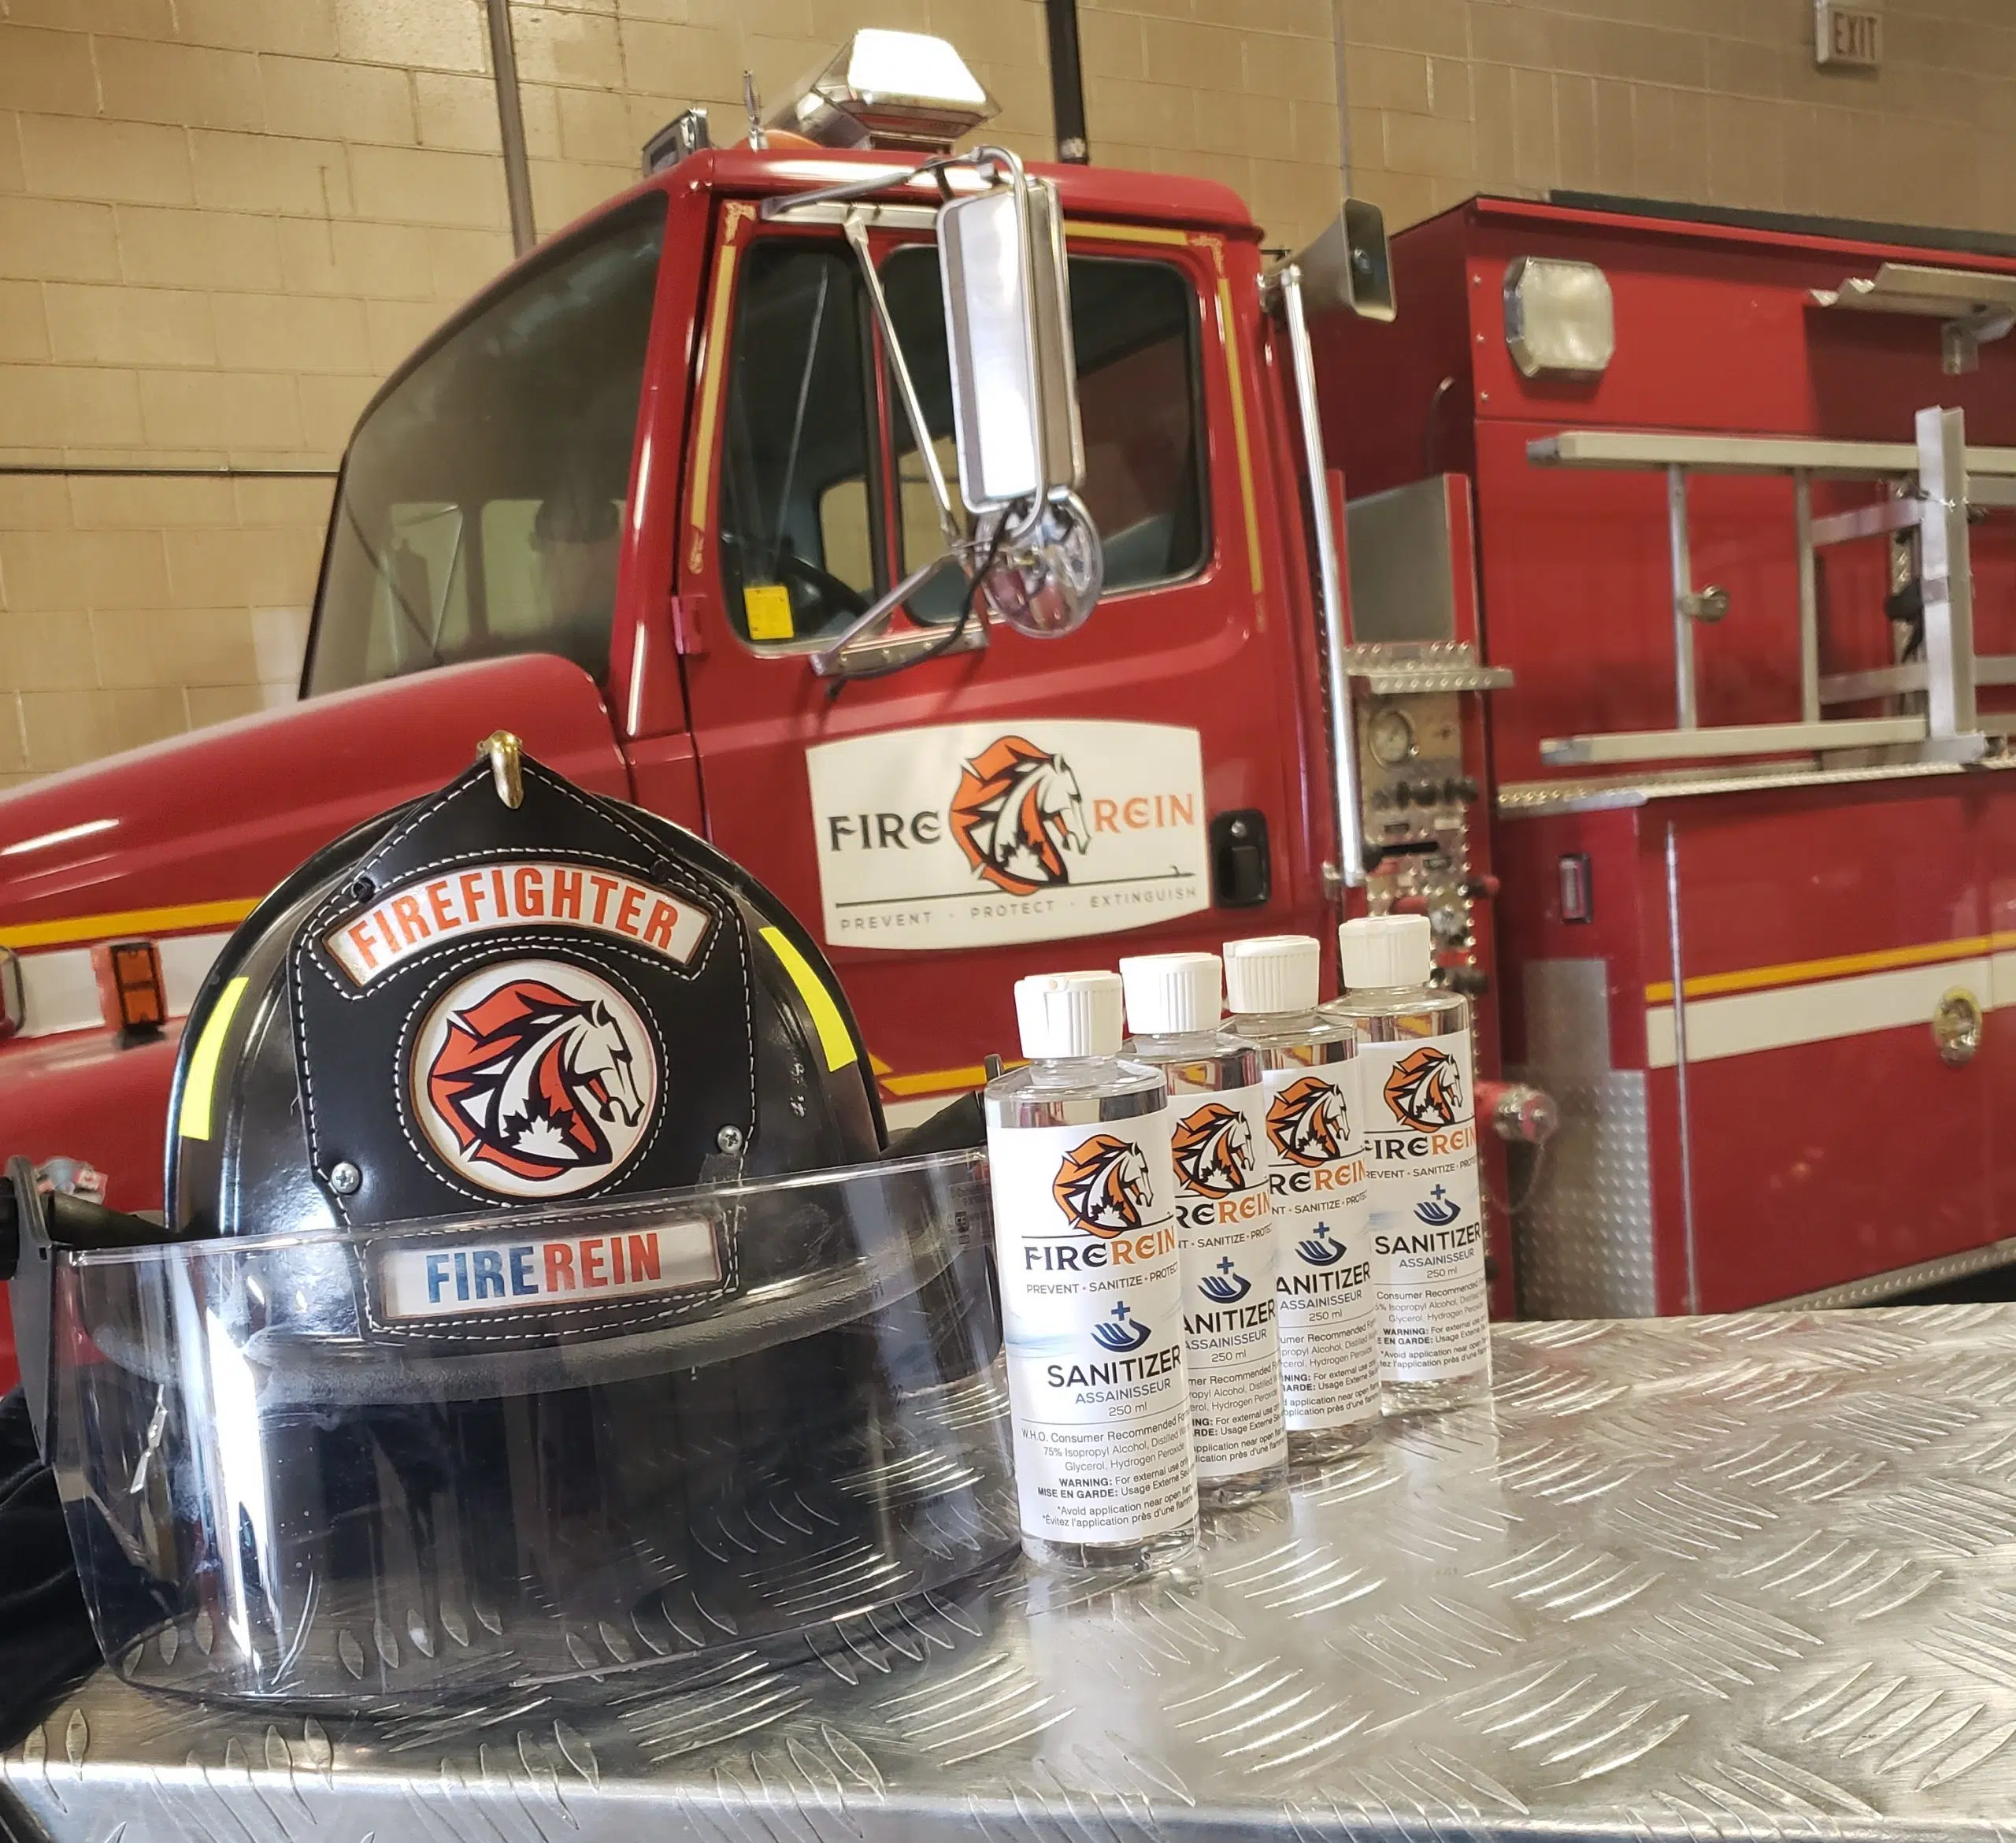 From fire suppressant to sanitizer